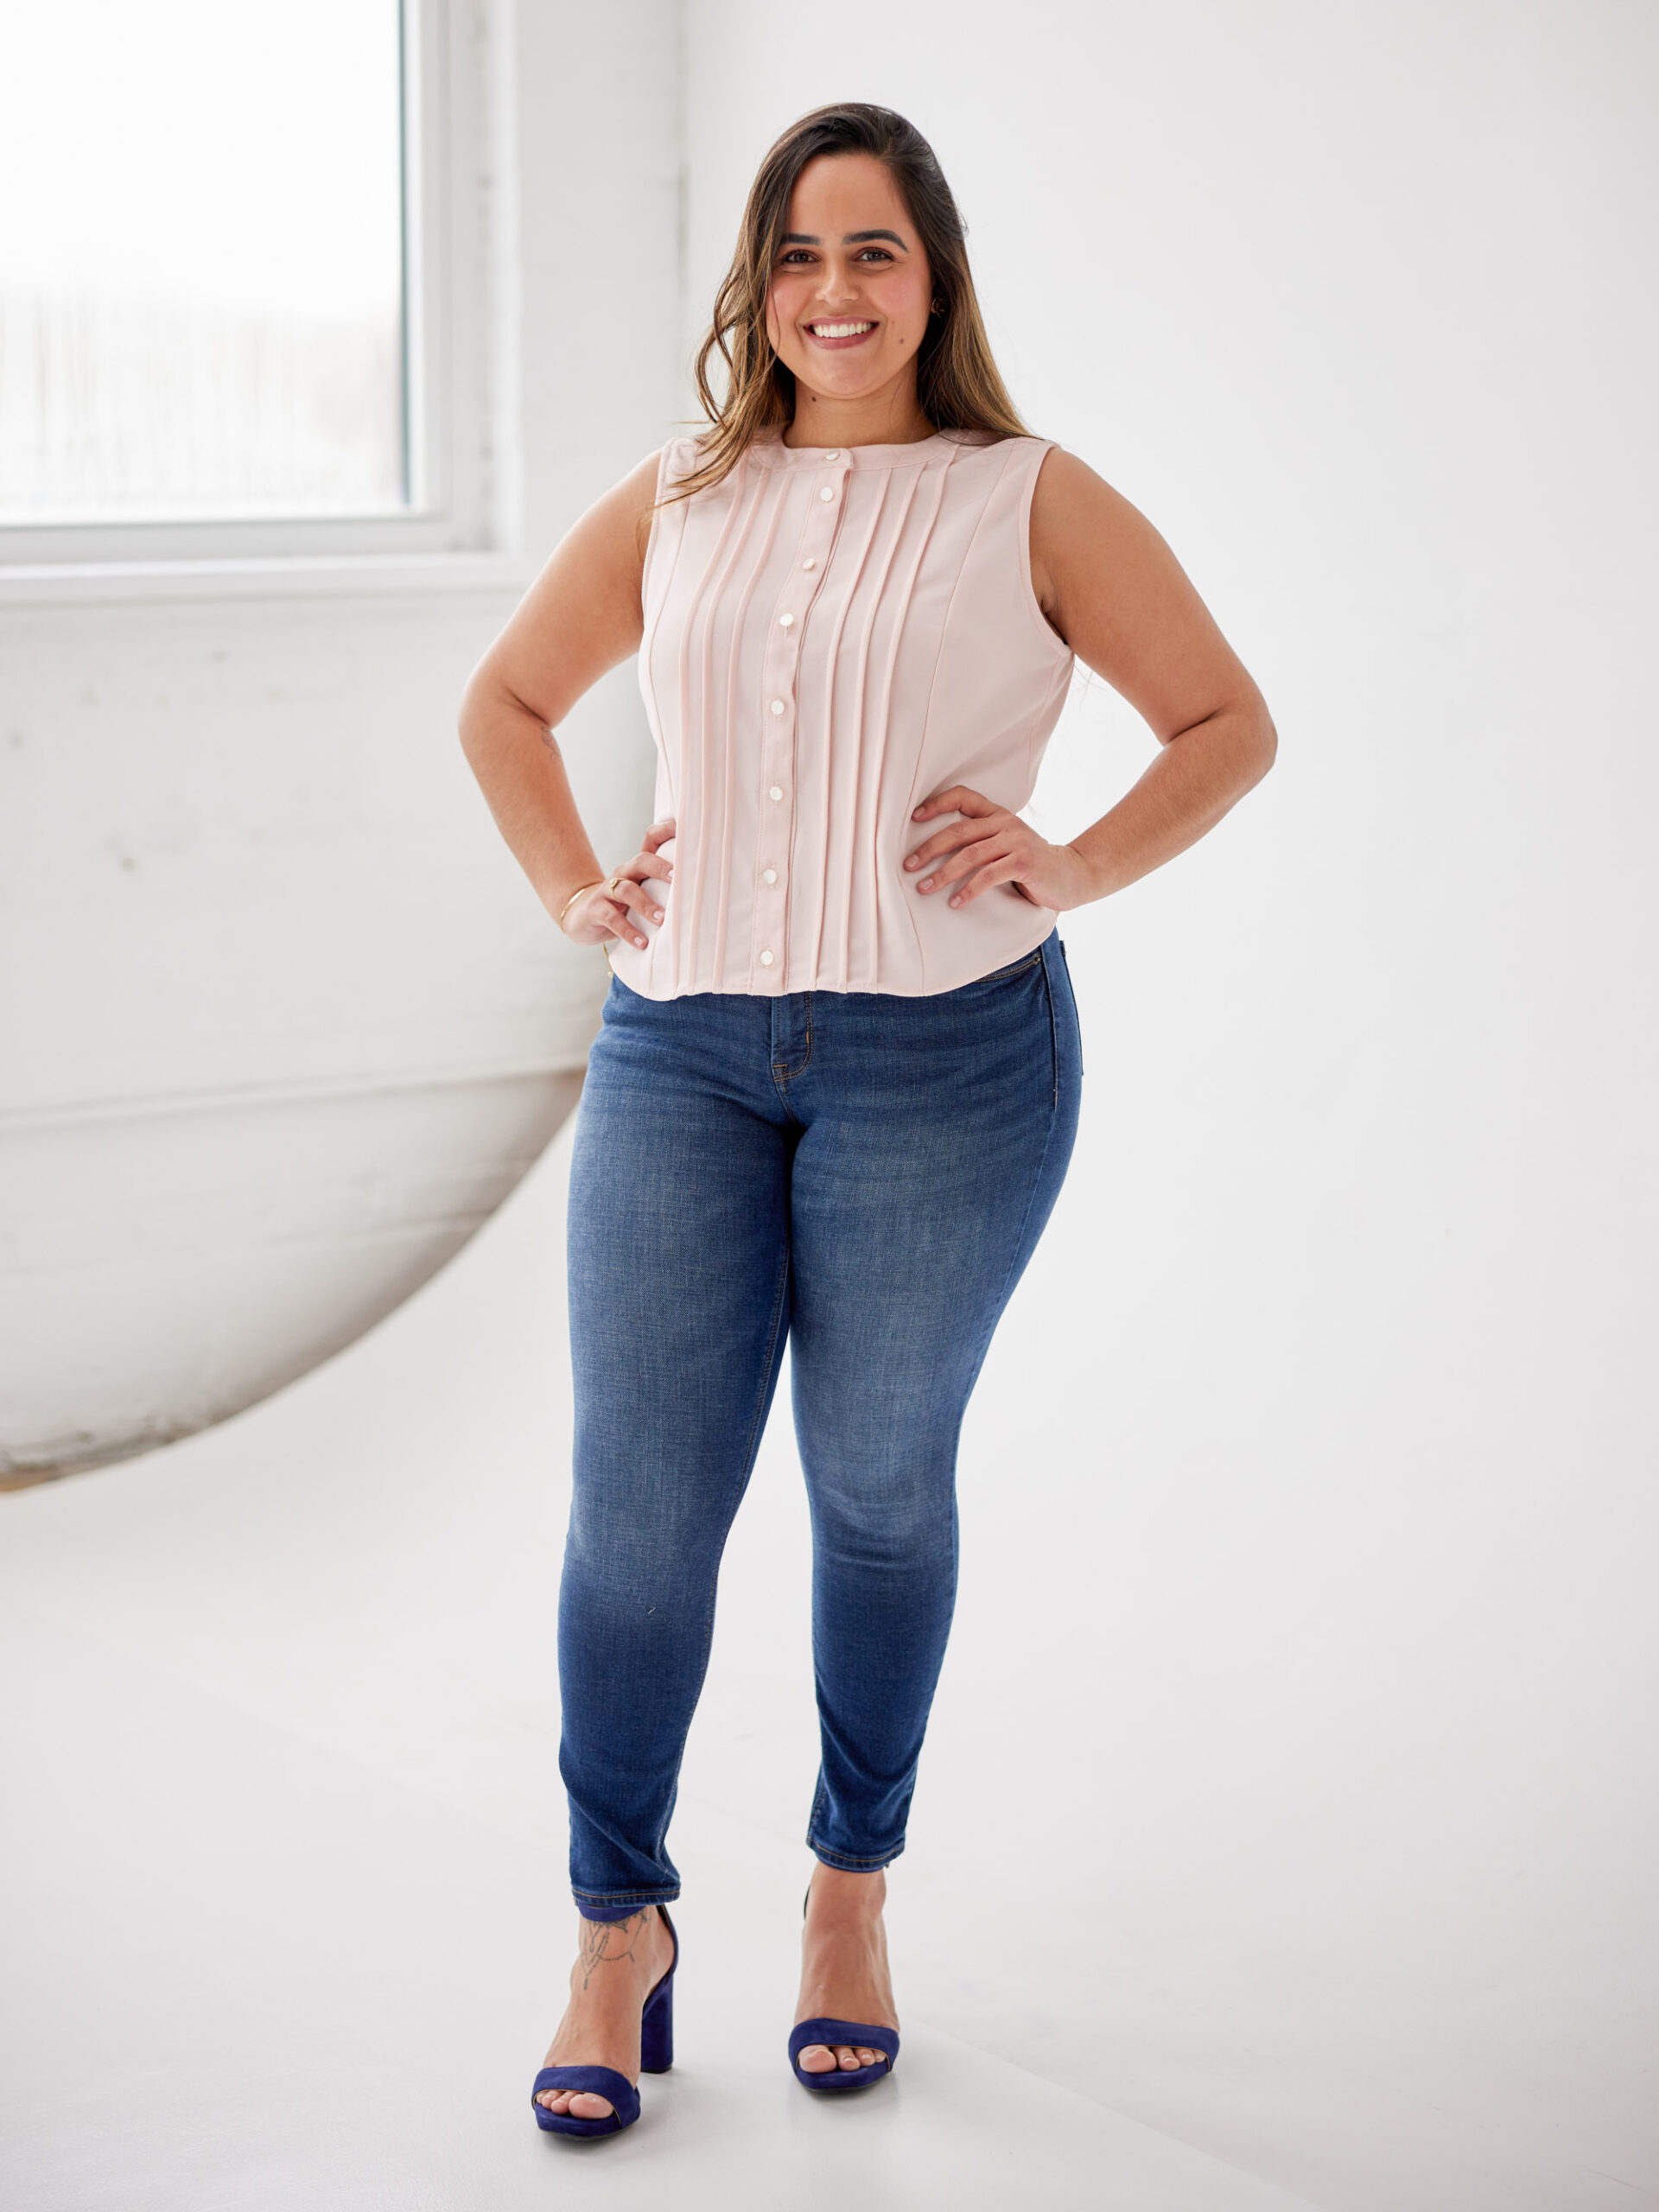 Cashmerette Club: Meet the Selwyn Top, the Club pattern for June